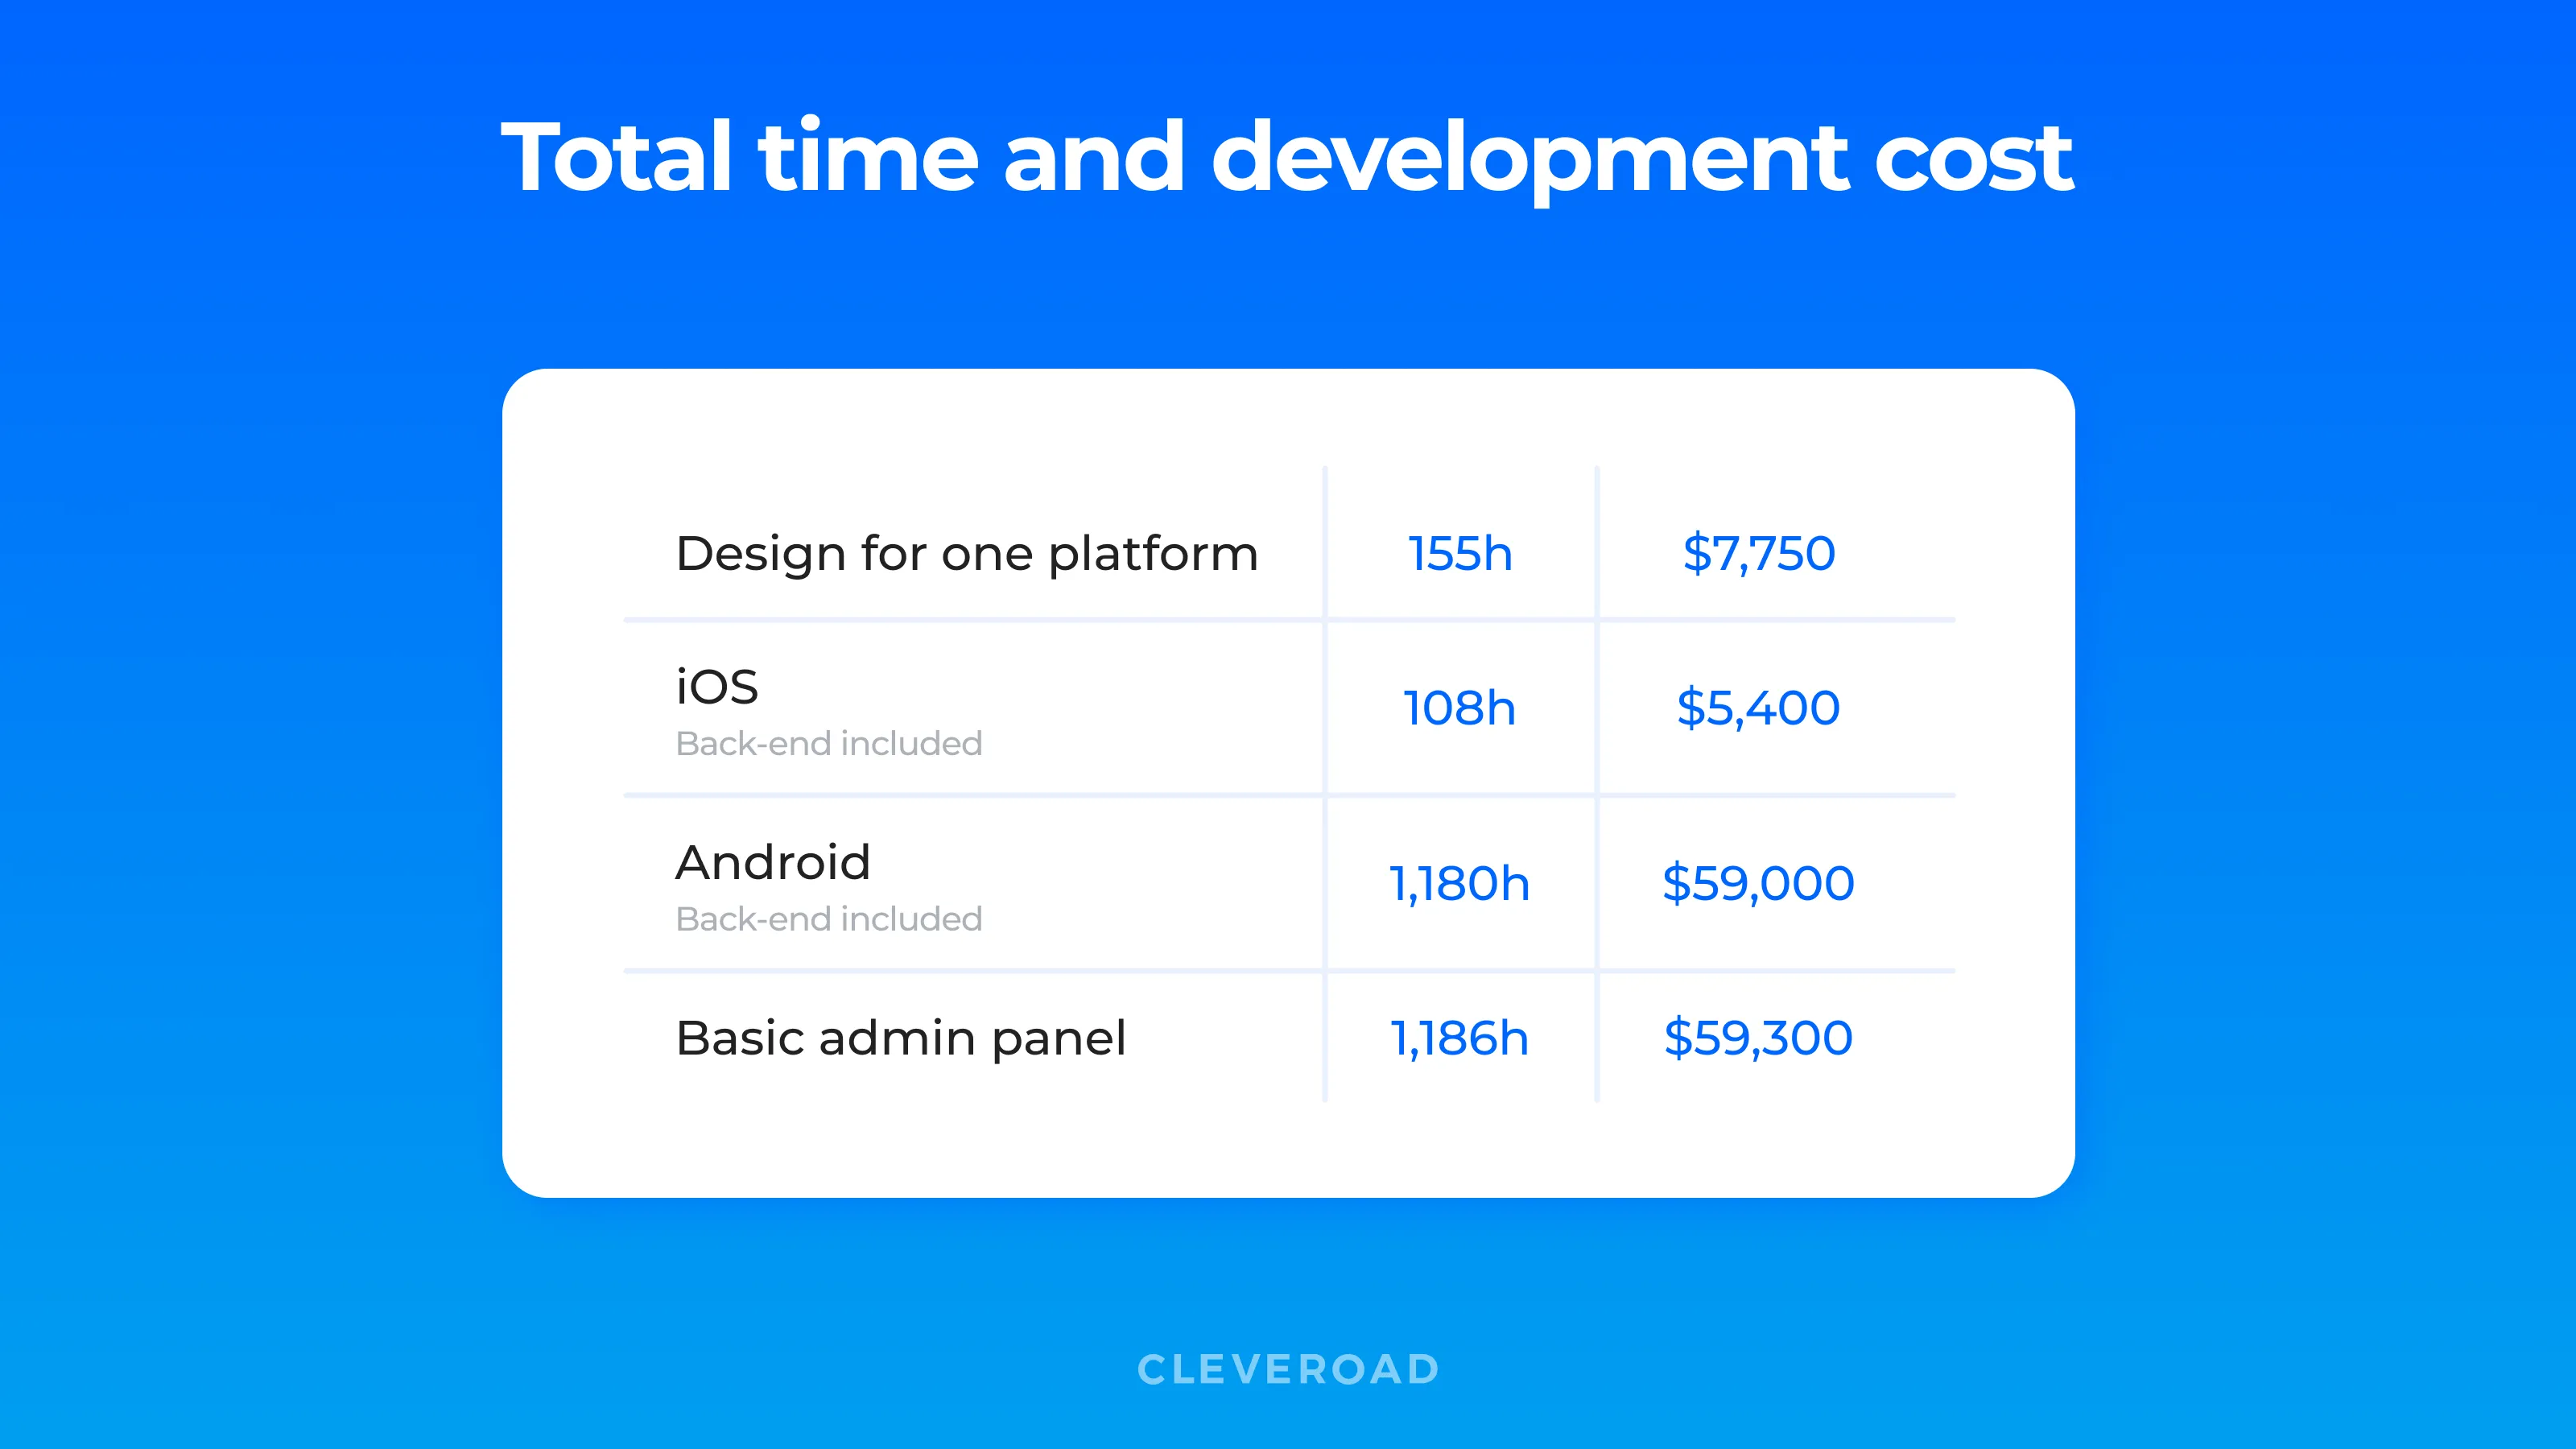 Time and cost for each development stage